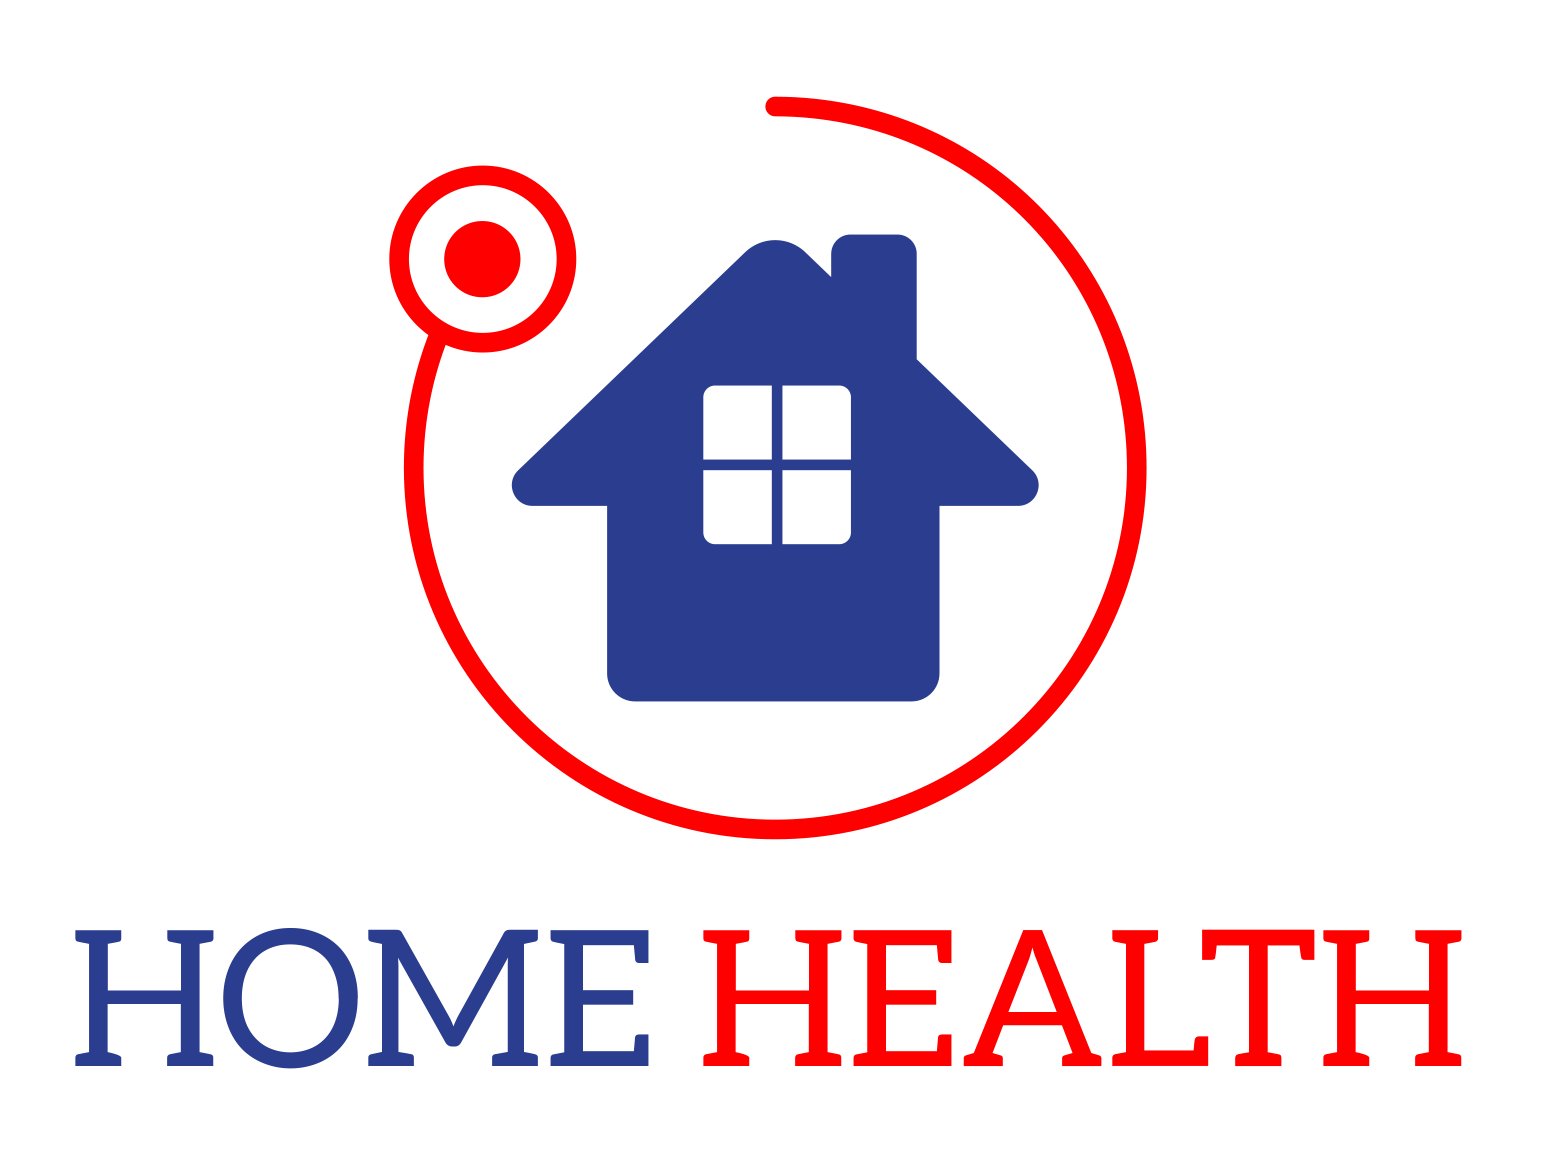 home-health.io - Providing you the best in home health care